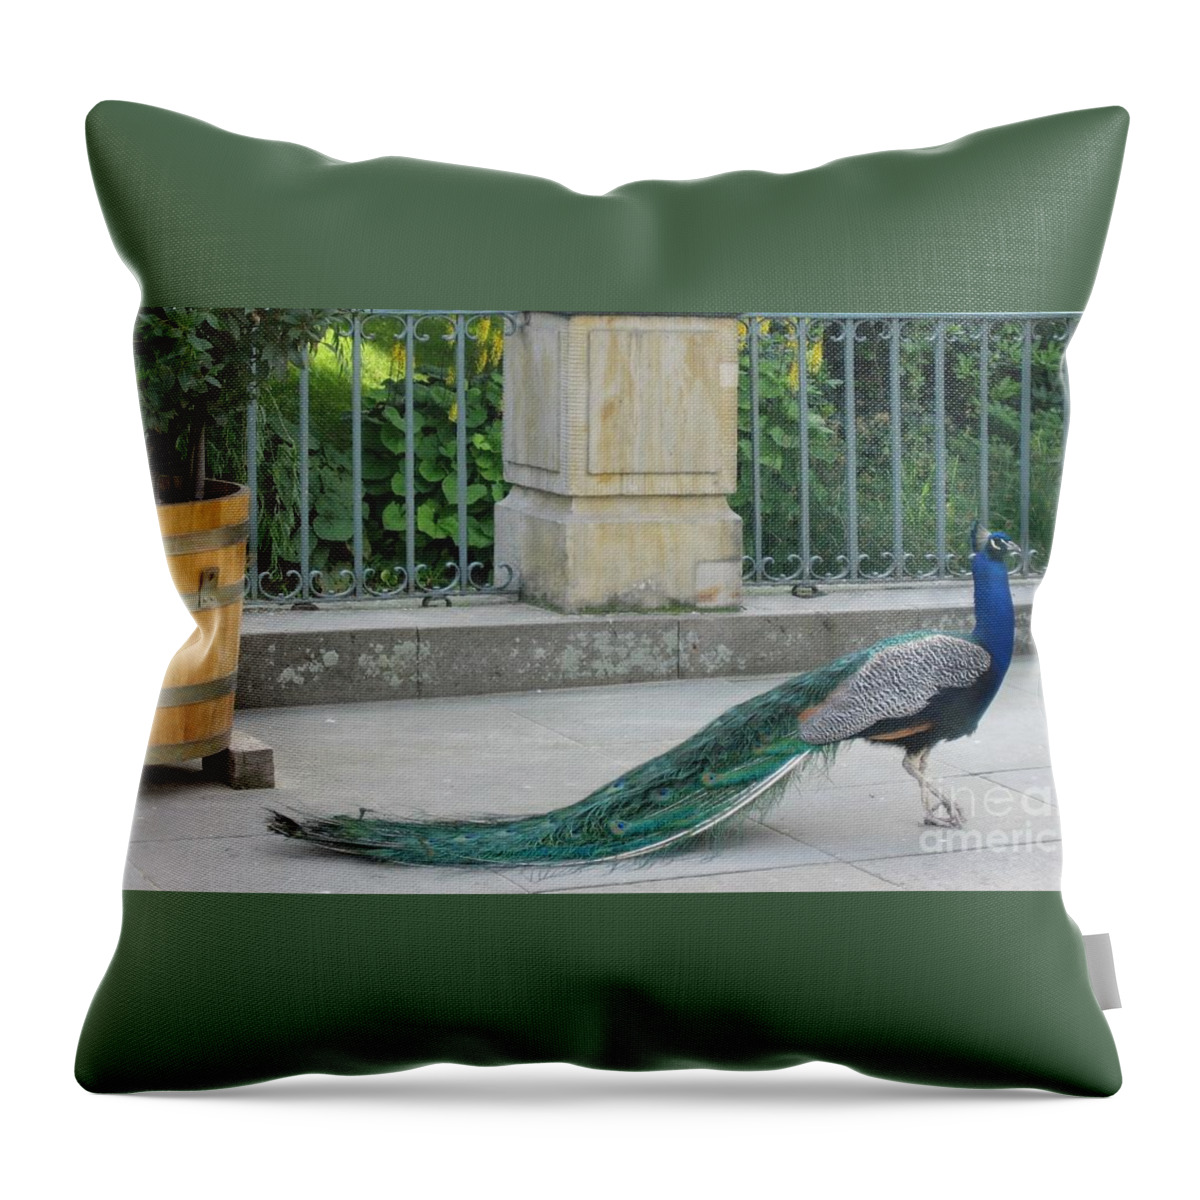 Peacock Throw Pillow featuring the photograph Peacock 3 by Nora Boghossian